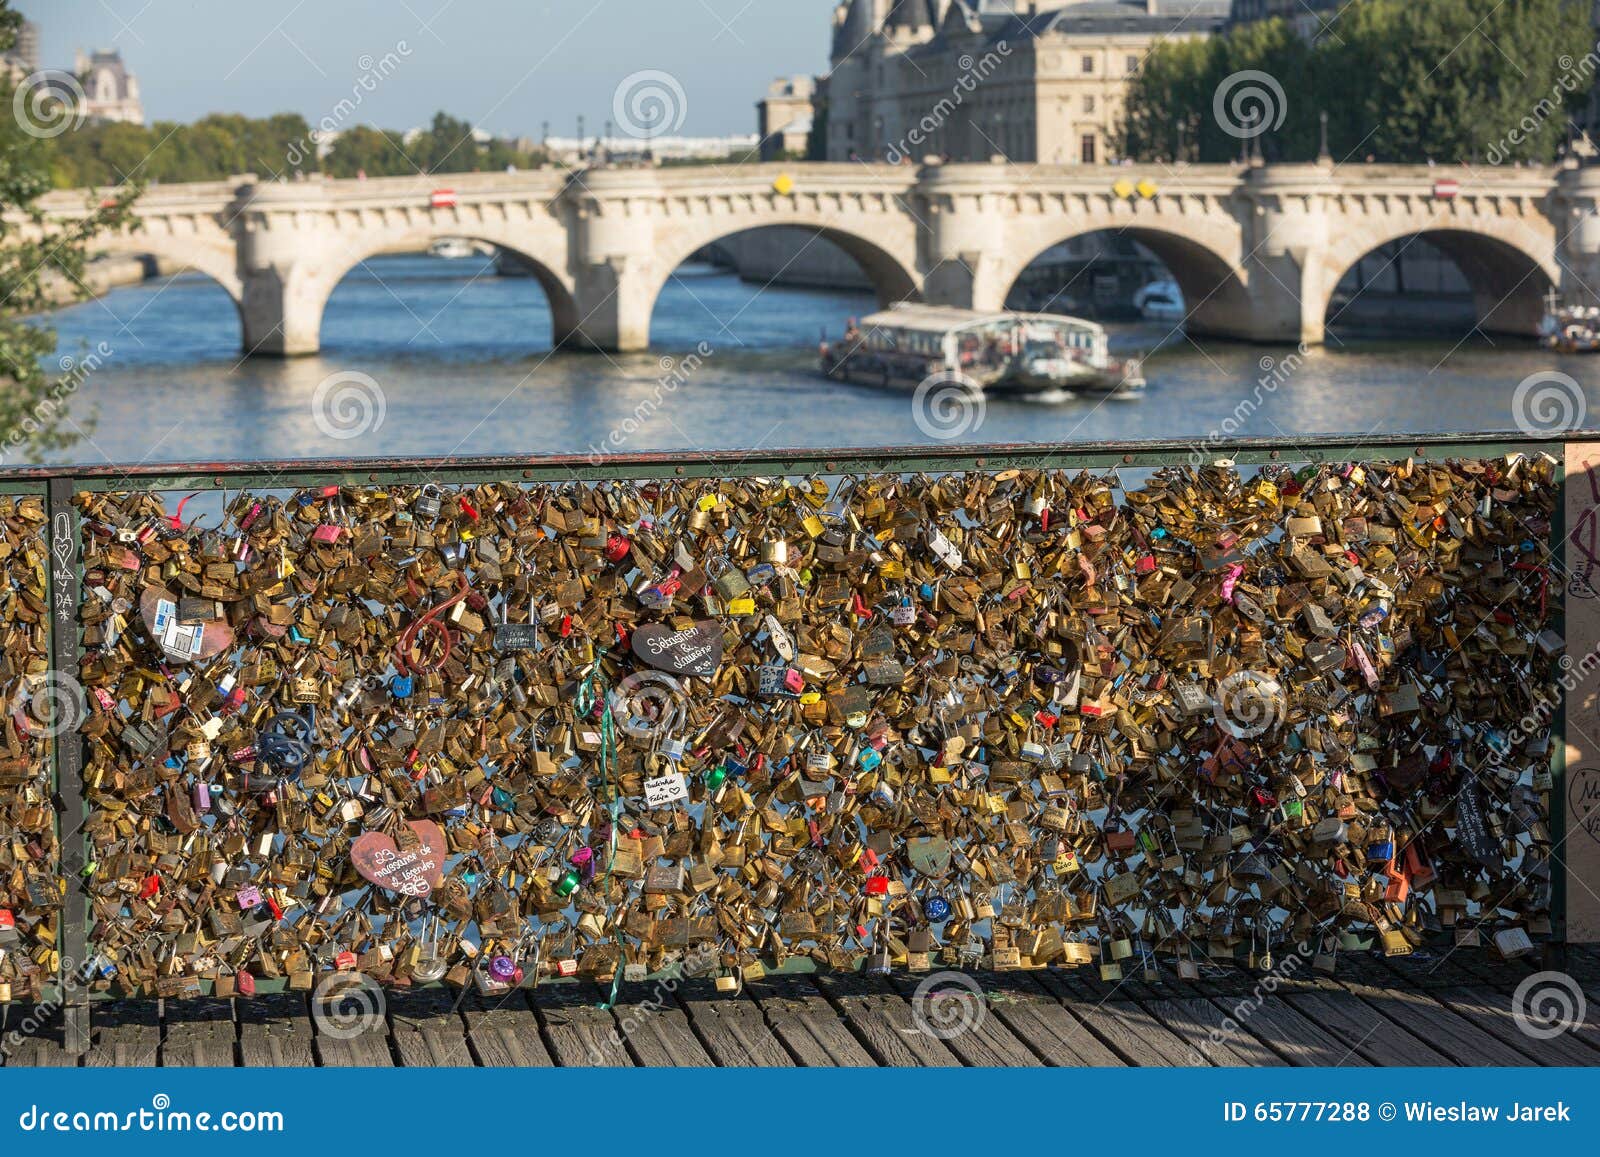 The Pont Des Arts And The Eiffel Tower In Paris, France Stock